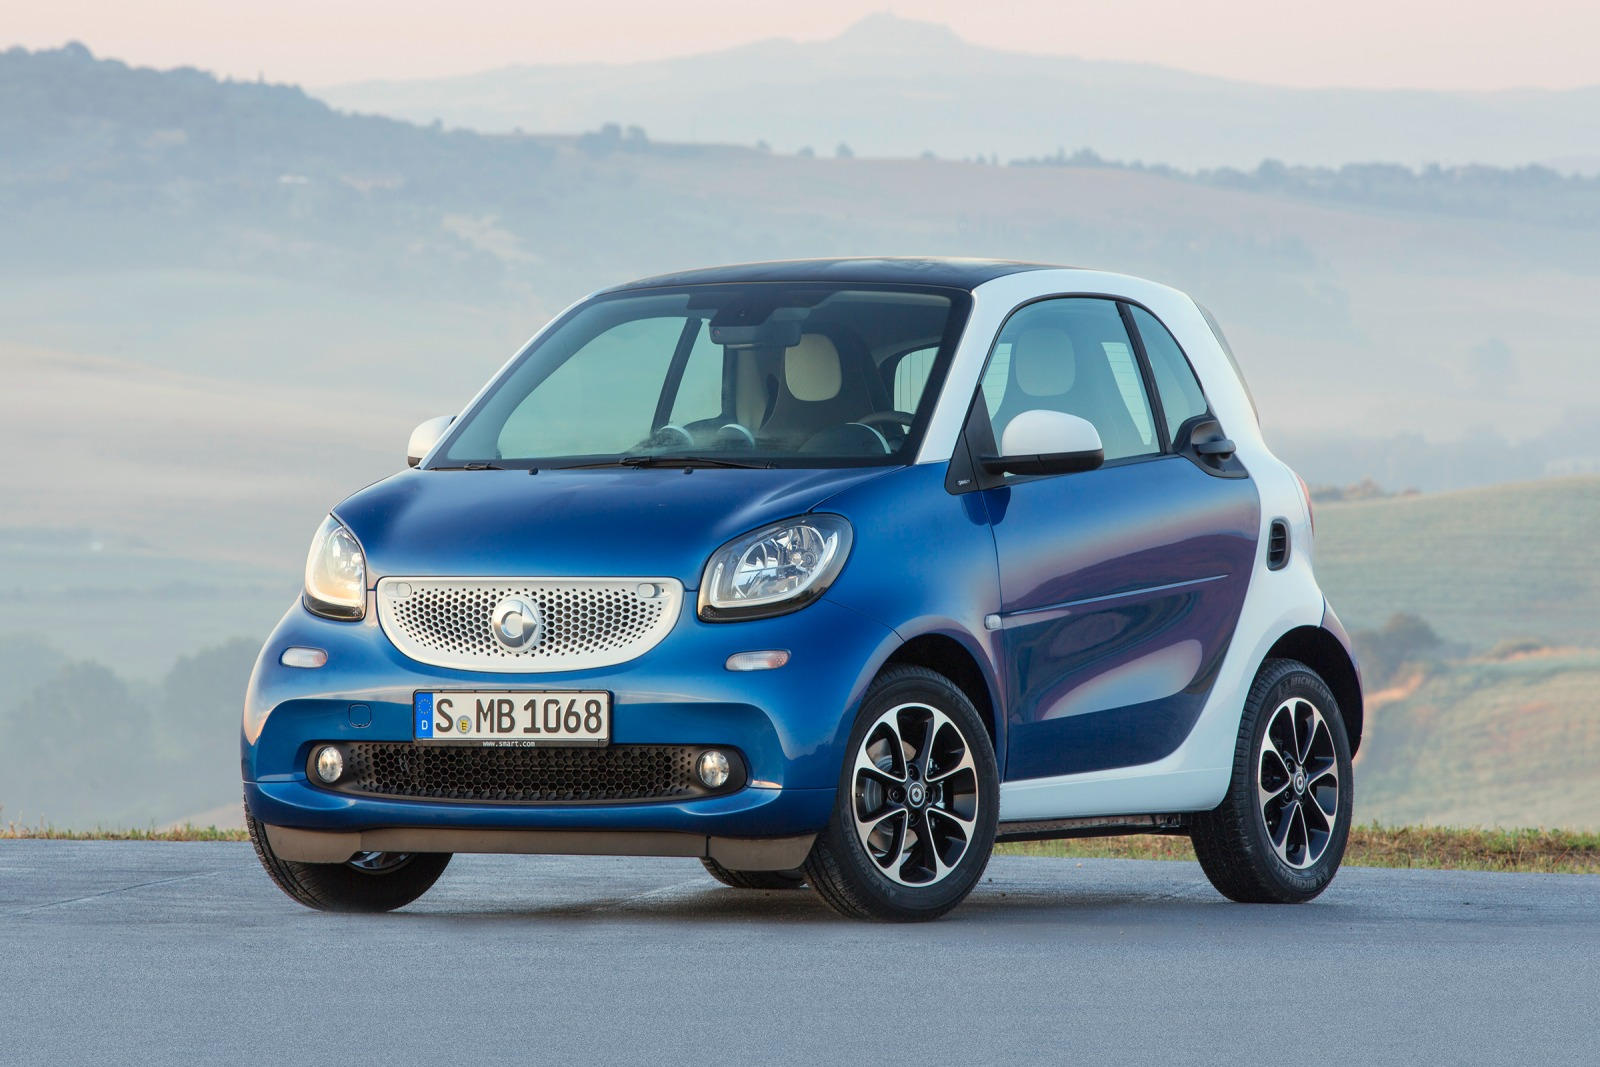 2017 smart fortwo: Review, Trims, Specs, Price, New Interior Features ...